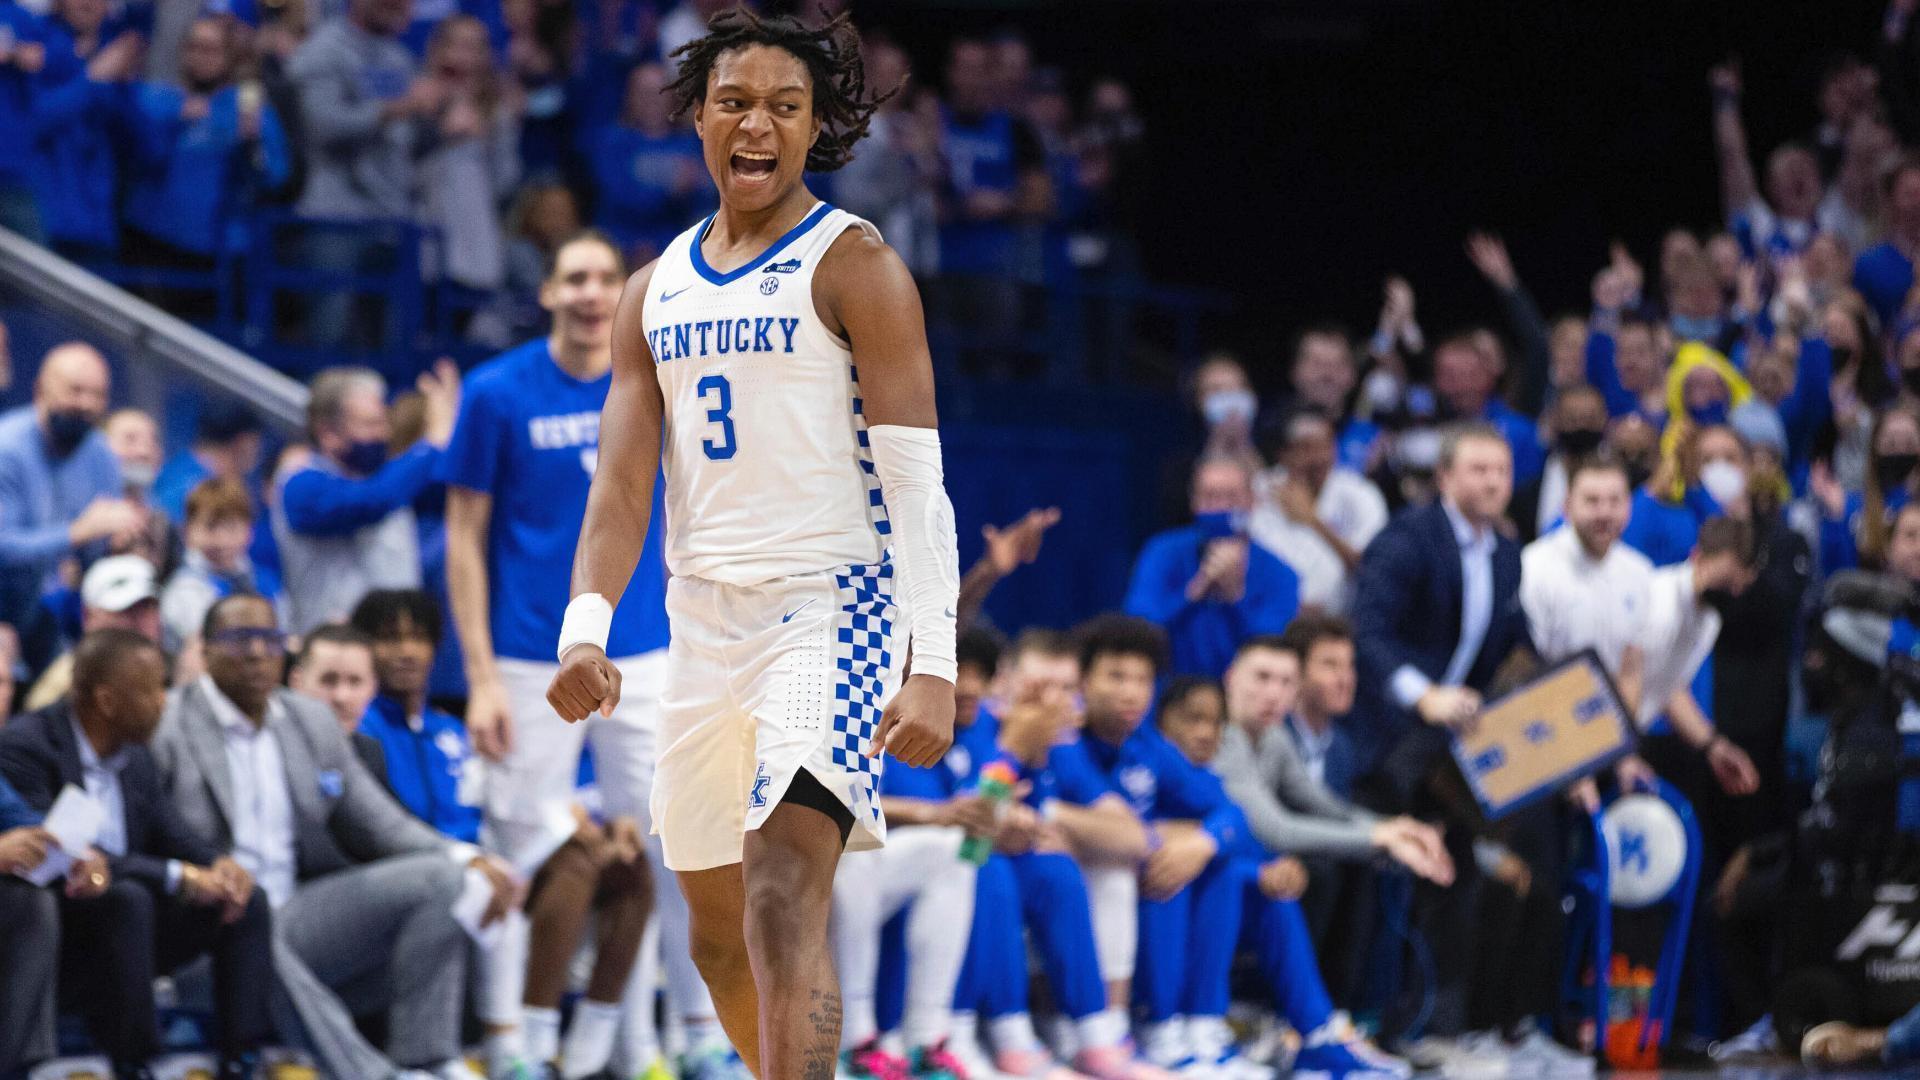 Kentucky puts up 107 in rout of Tennessee